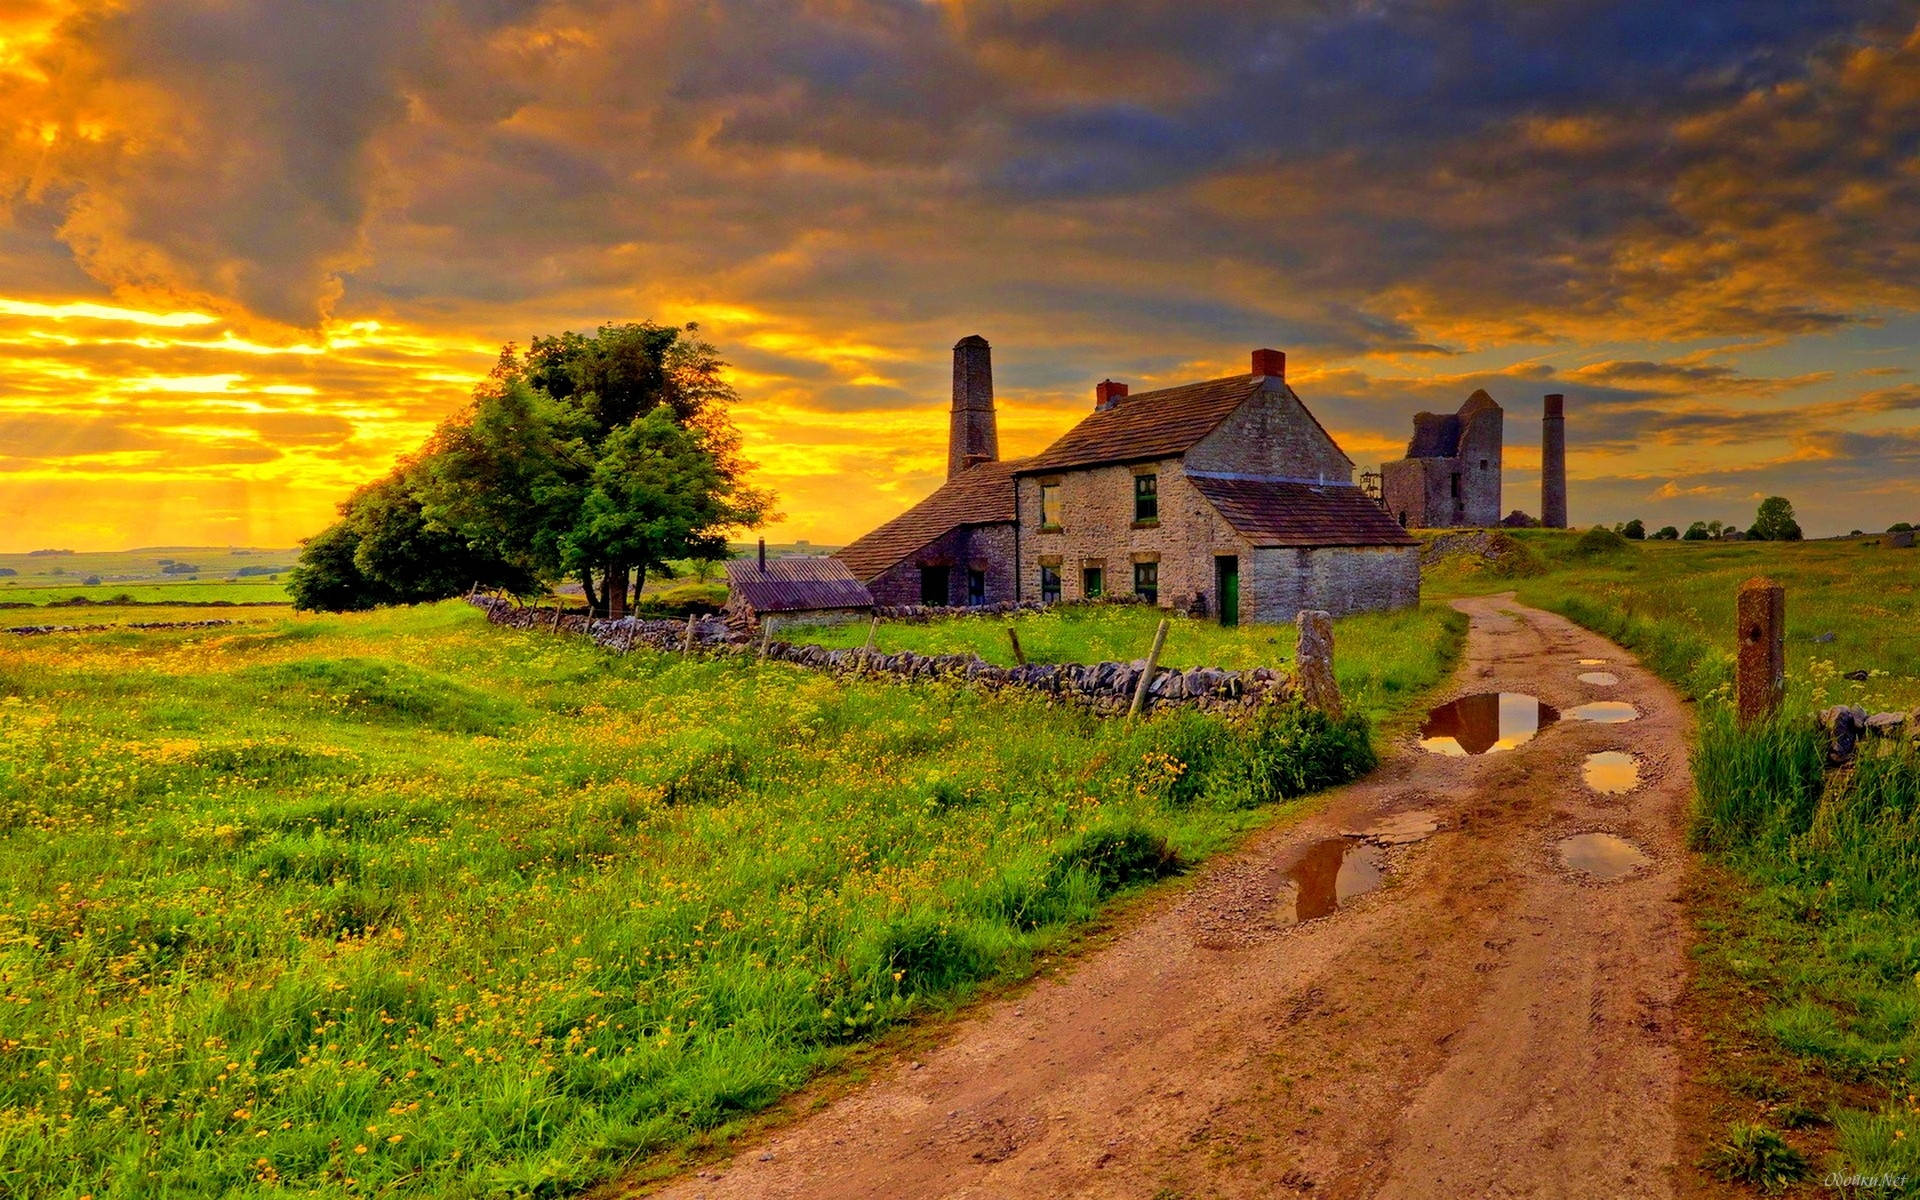 Find solace in the beauty of a farm. Wallpaper